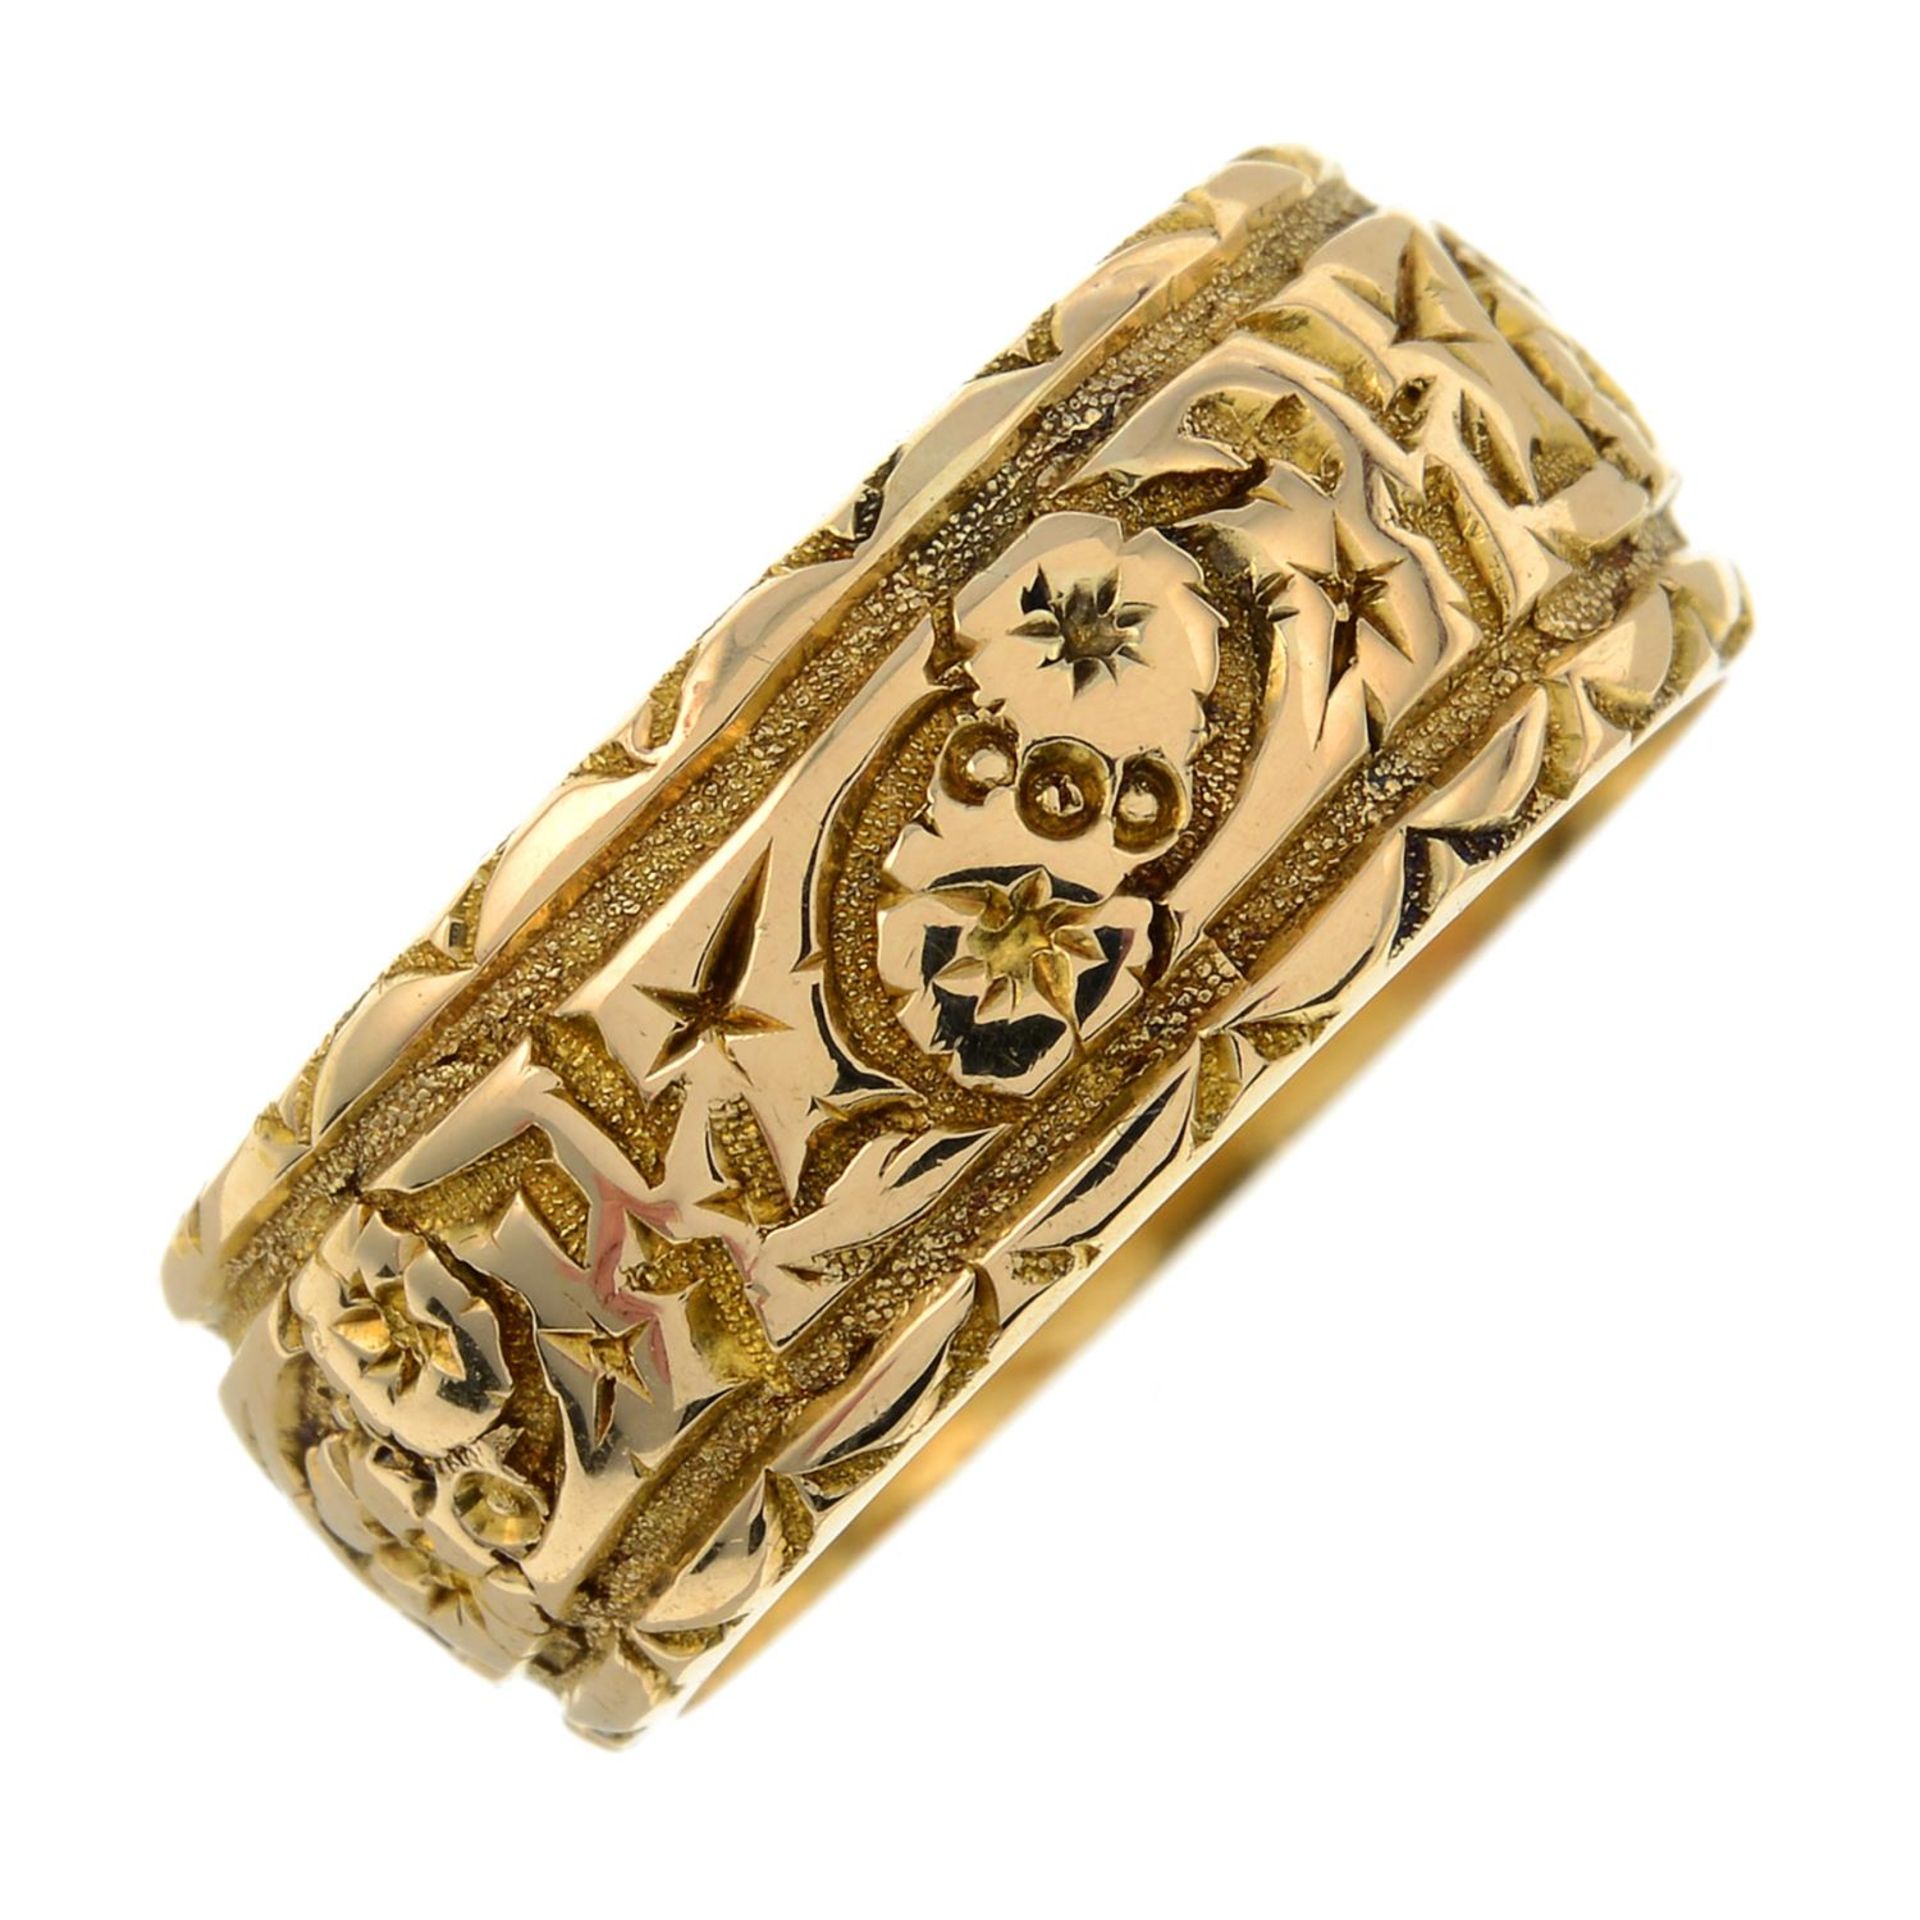 An Edwardian 18ct gold band ring.Hallmarks for Chester, 1904.Ring size P.